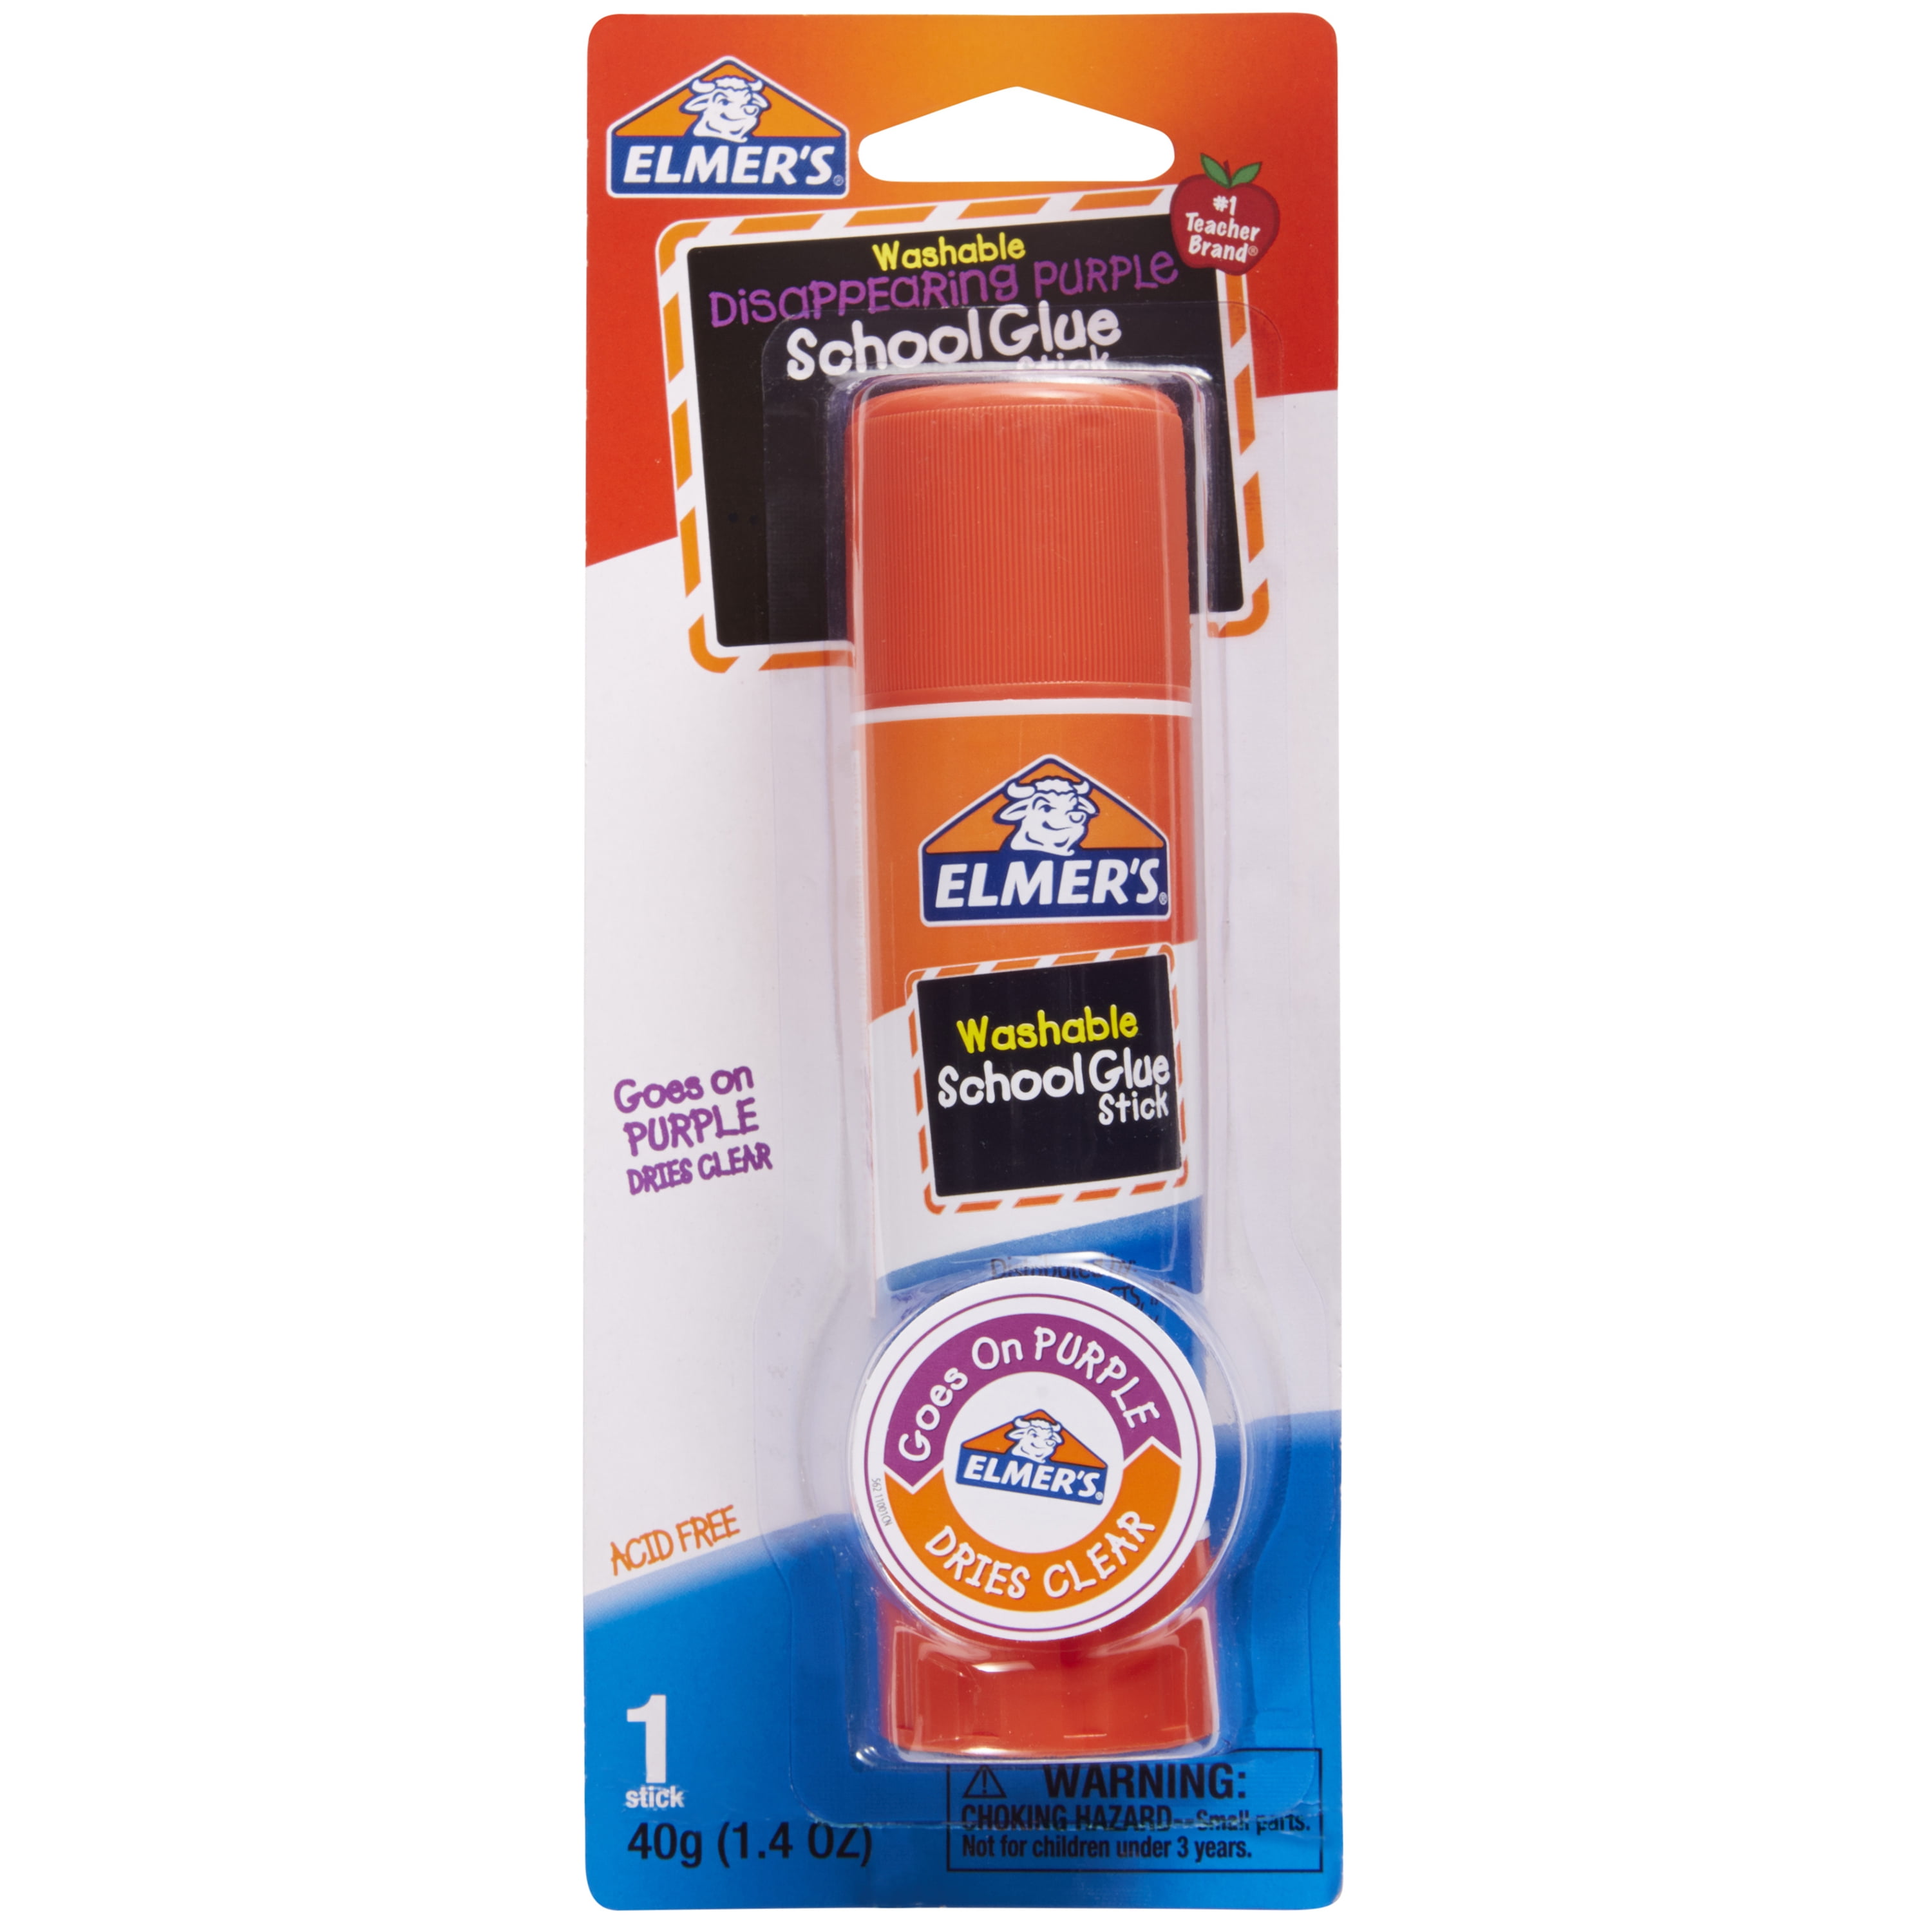 Elmer's Disappearing Purple School Glue Sticks, Washable, 7 Grams,  60 Count $15.55